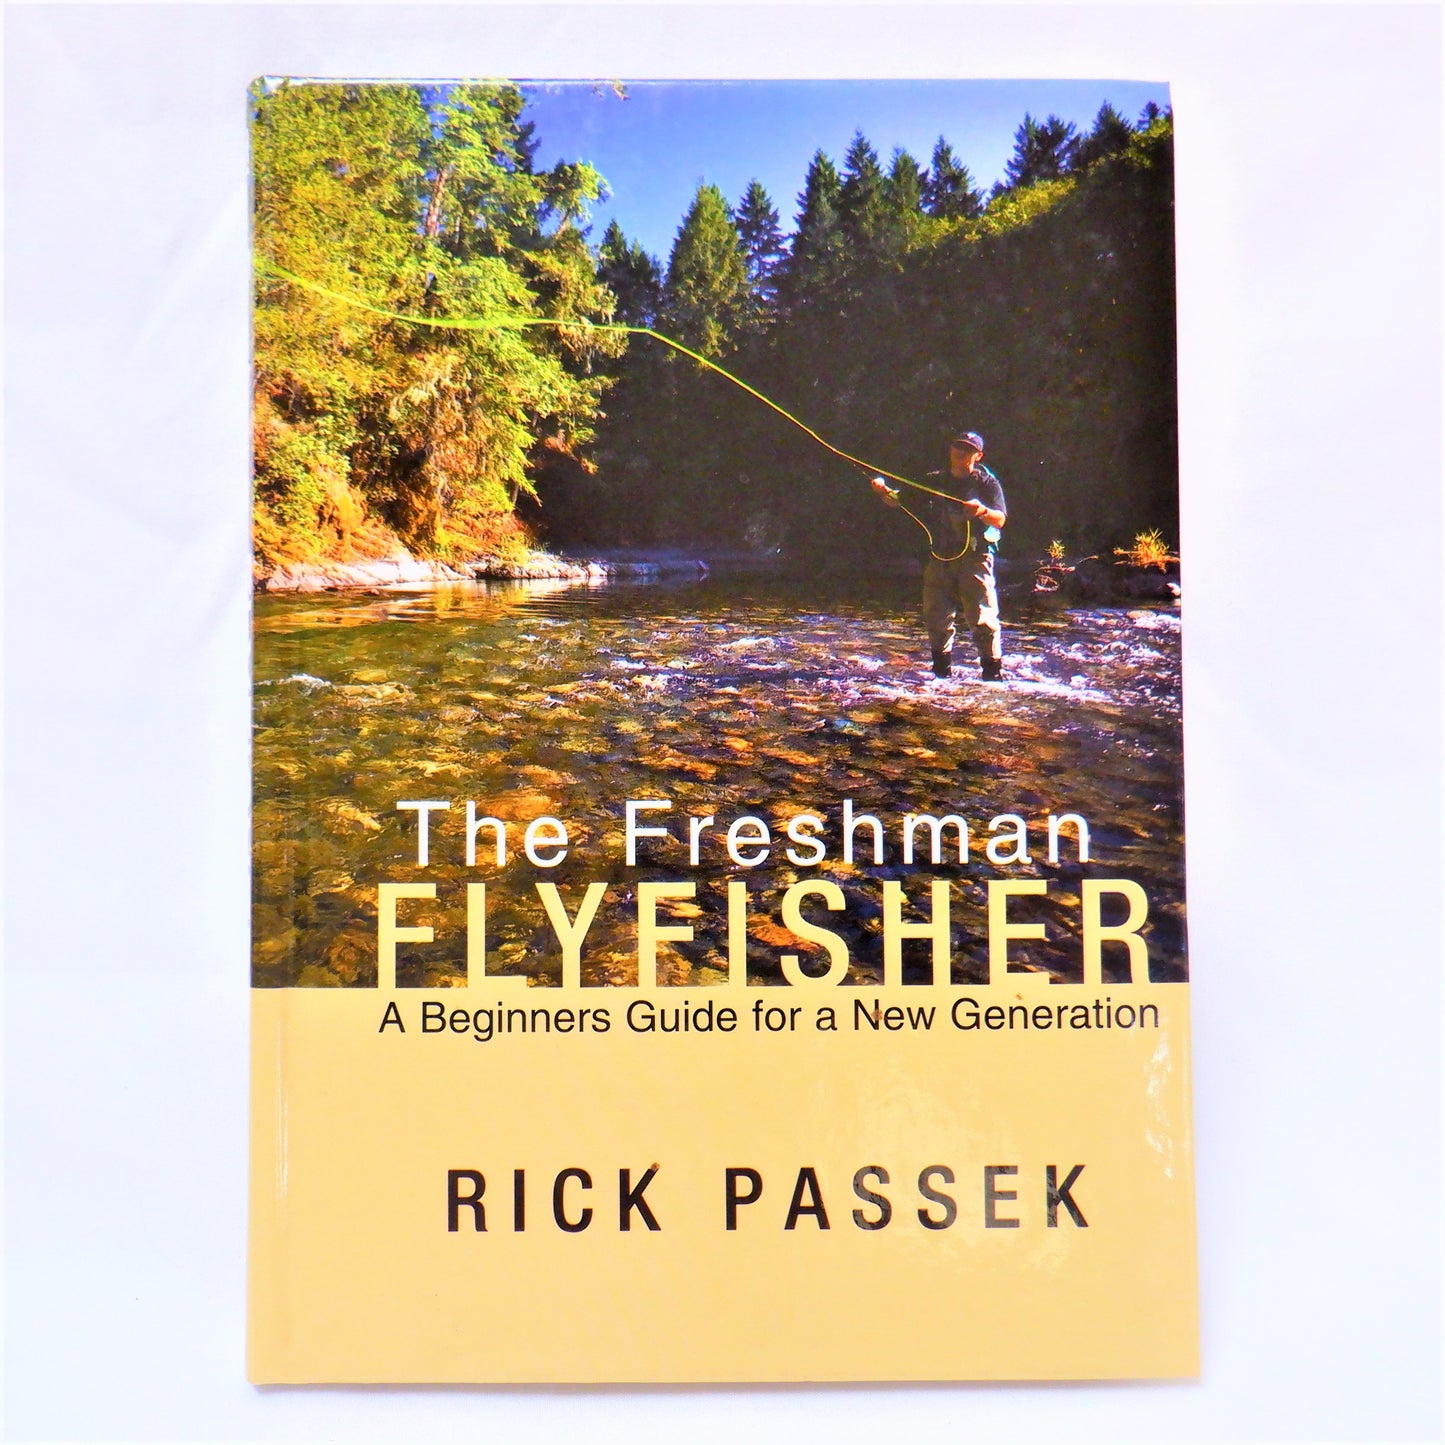 THE FRESHMAN FLYFISHER, A Beginners Guide for a new Generation, by